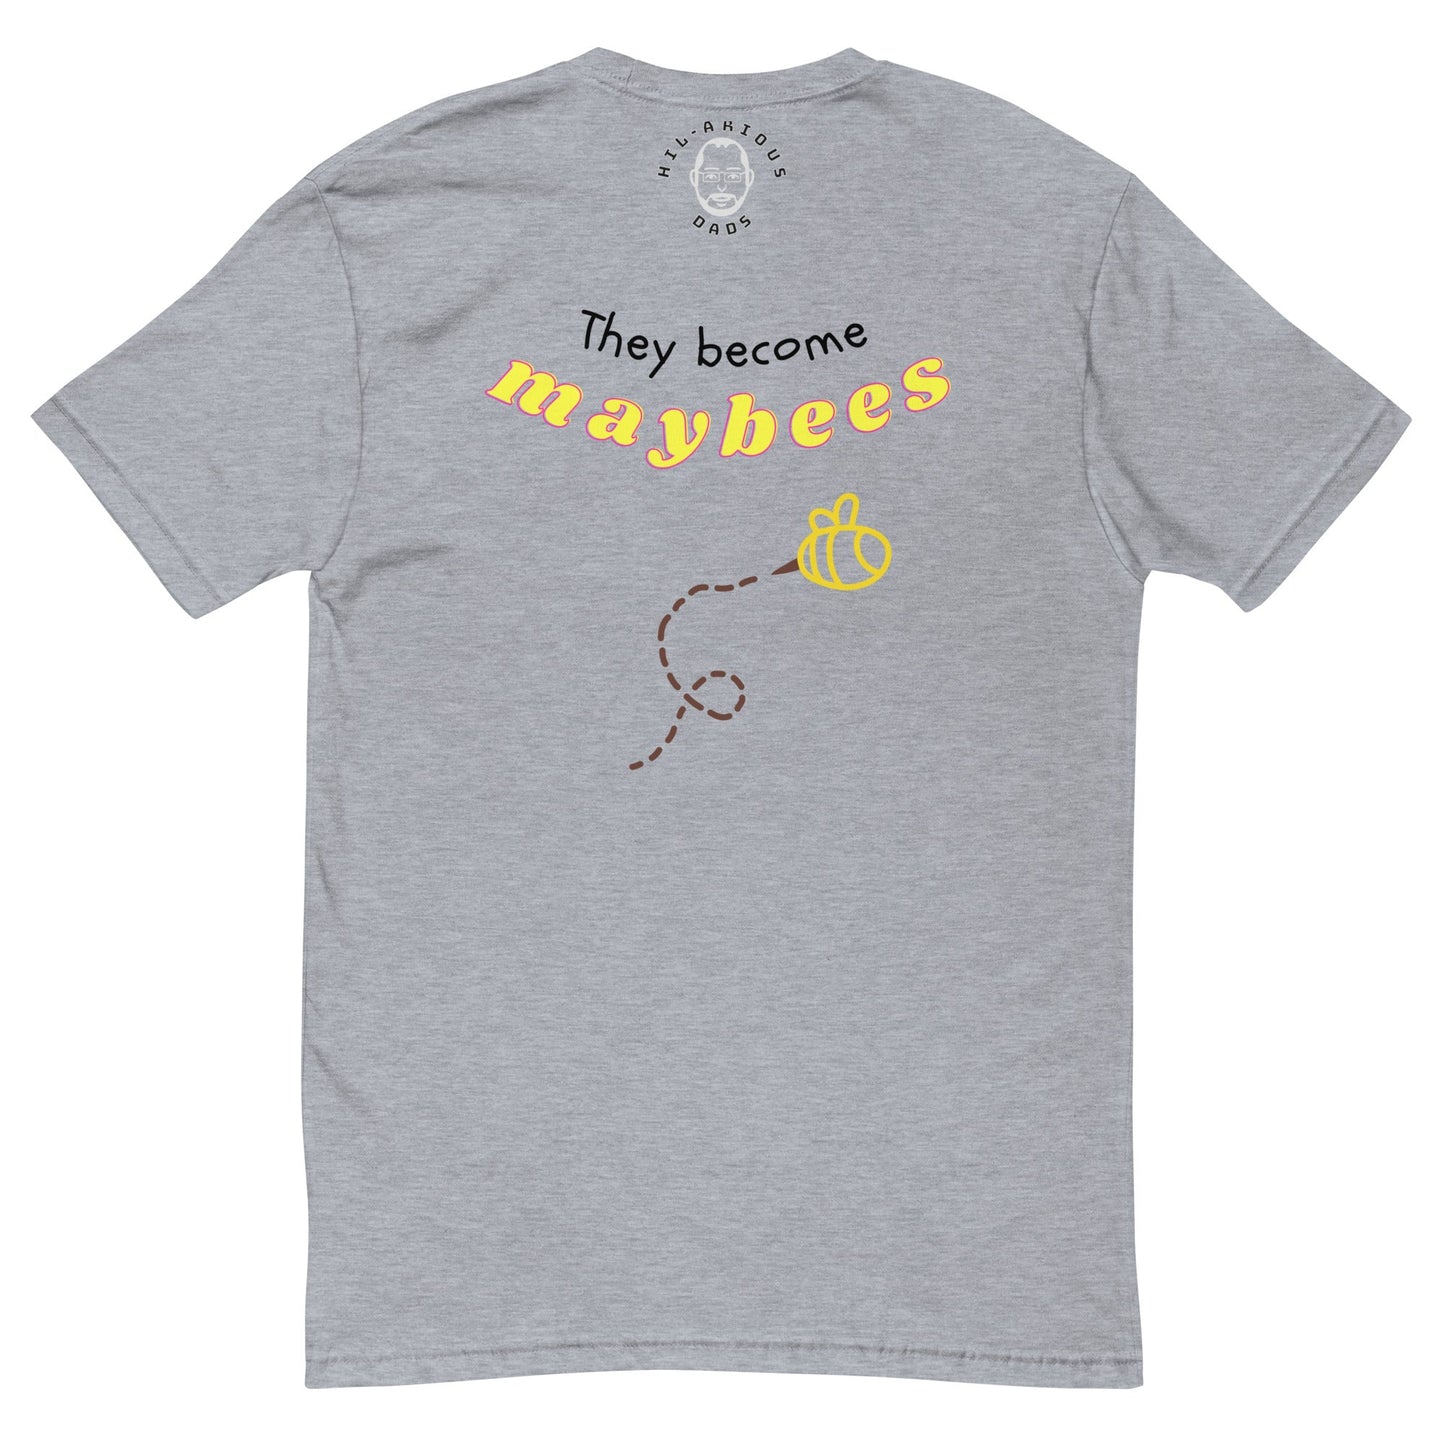 Did you know bees become indecisive after April?-T-shirt - Hil-arious Dads